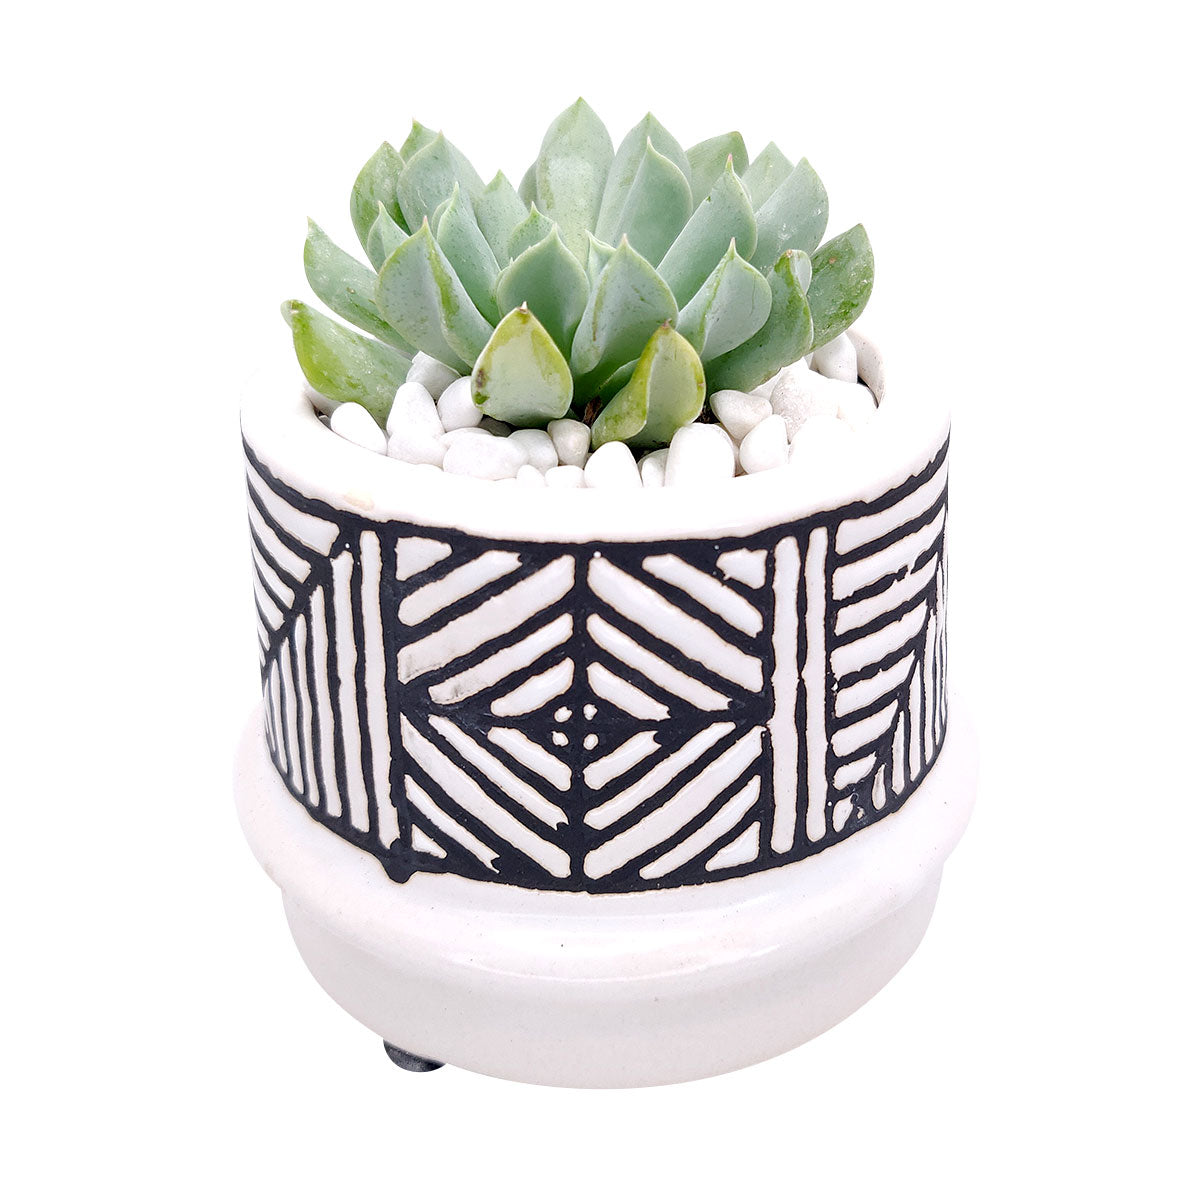 Tribal Geometric Ceramic Pot for sale, Pot for cactus and succulent, modern style home decor, flower pot for sale